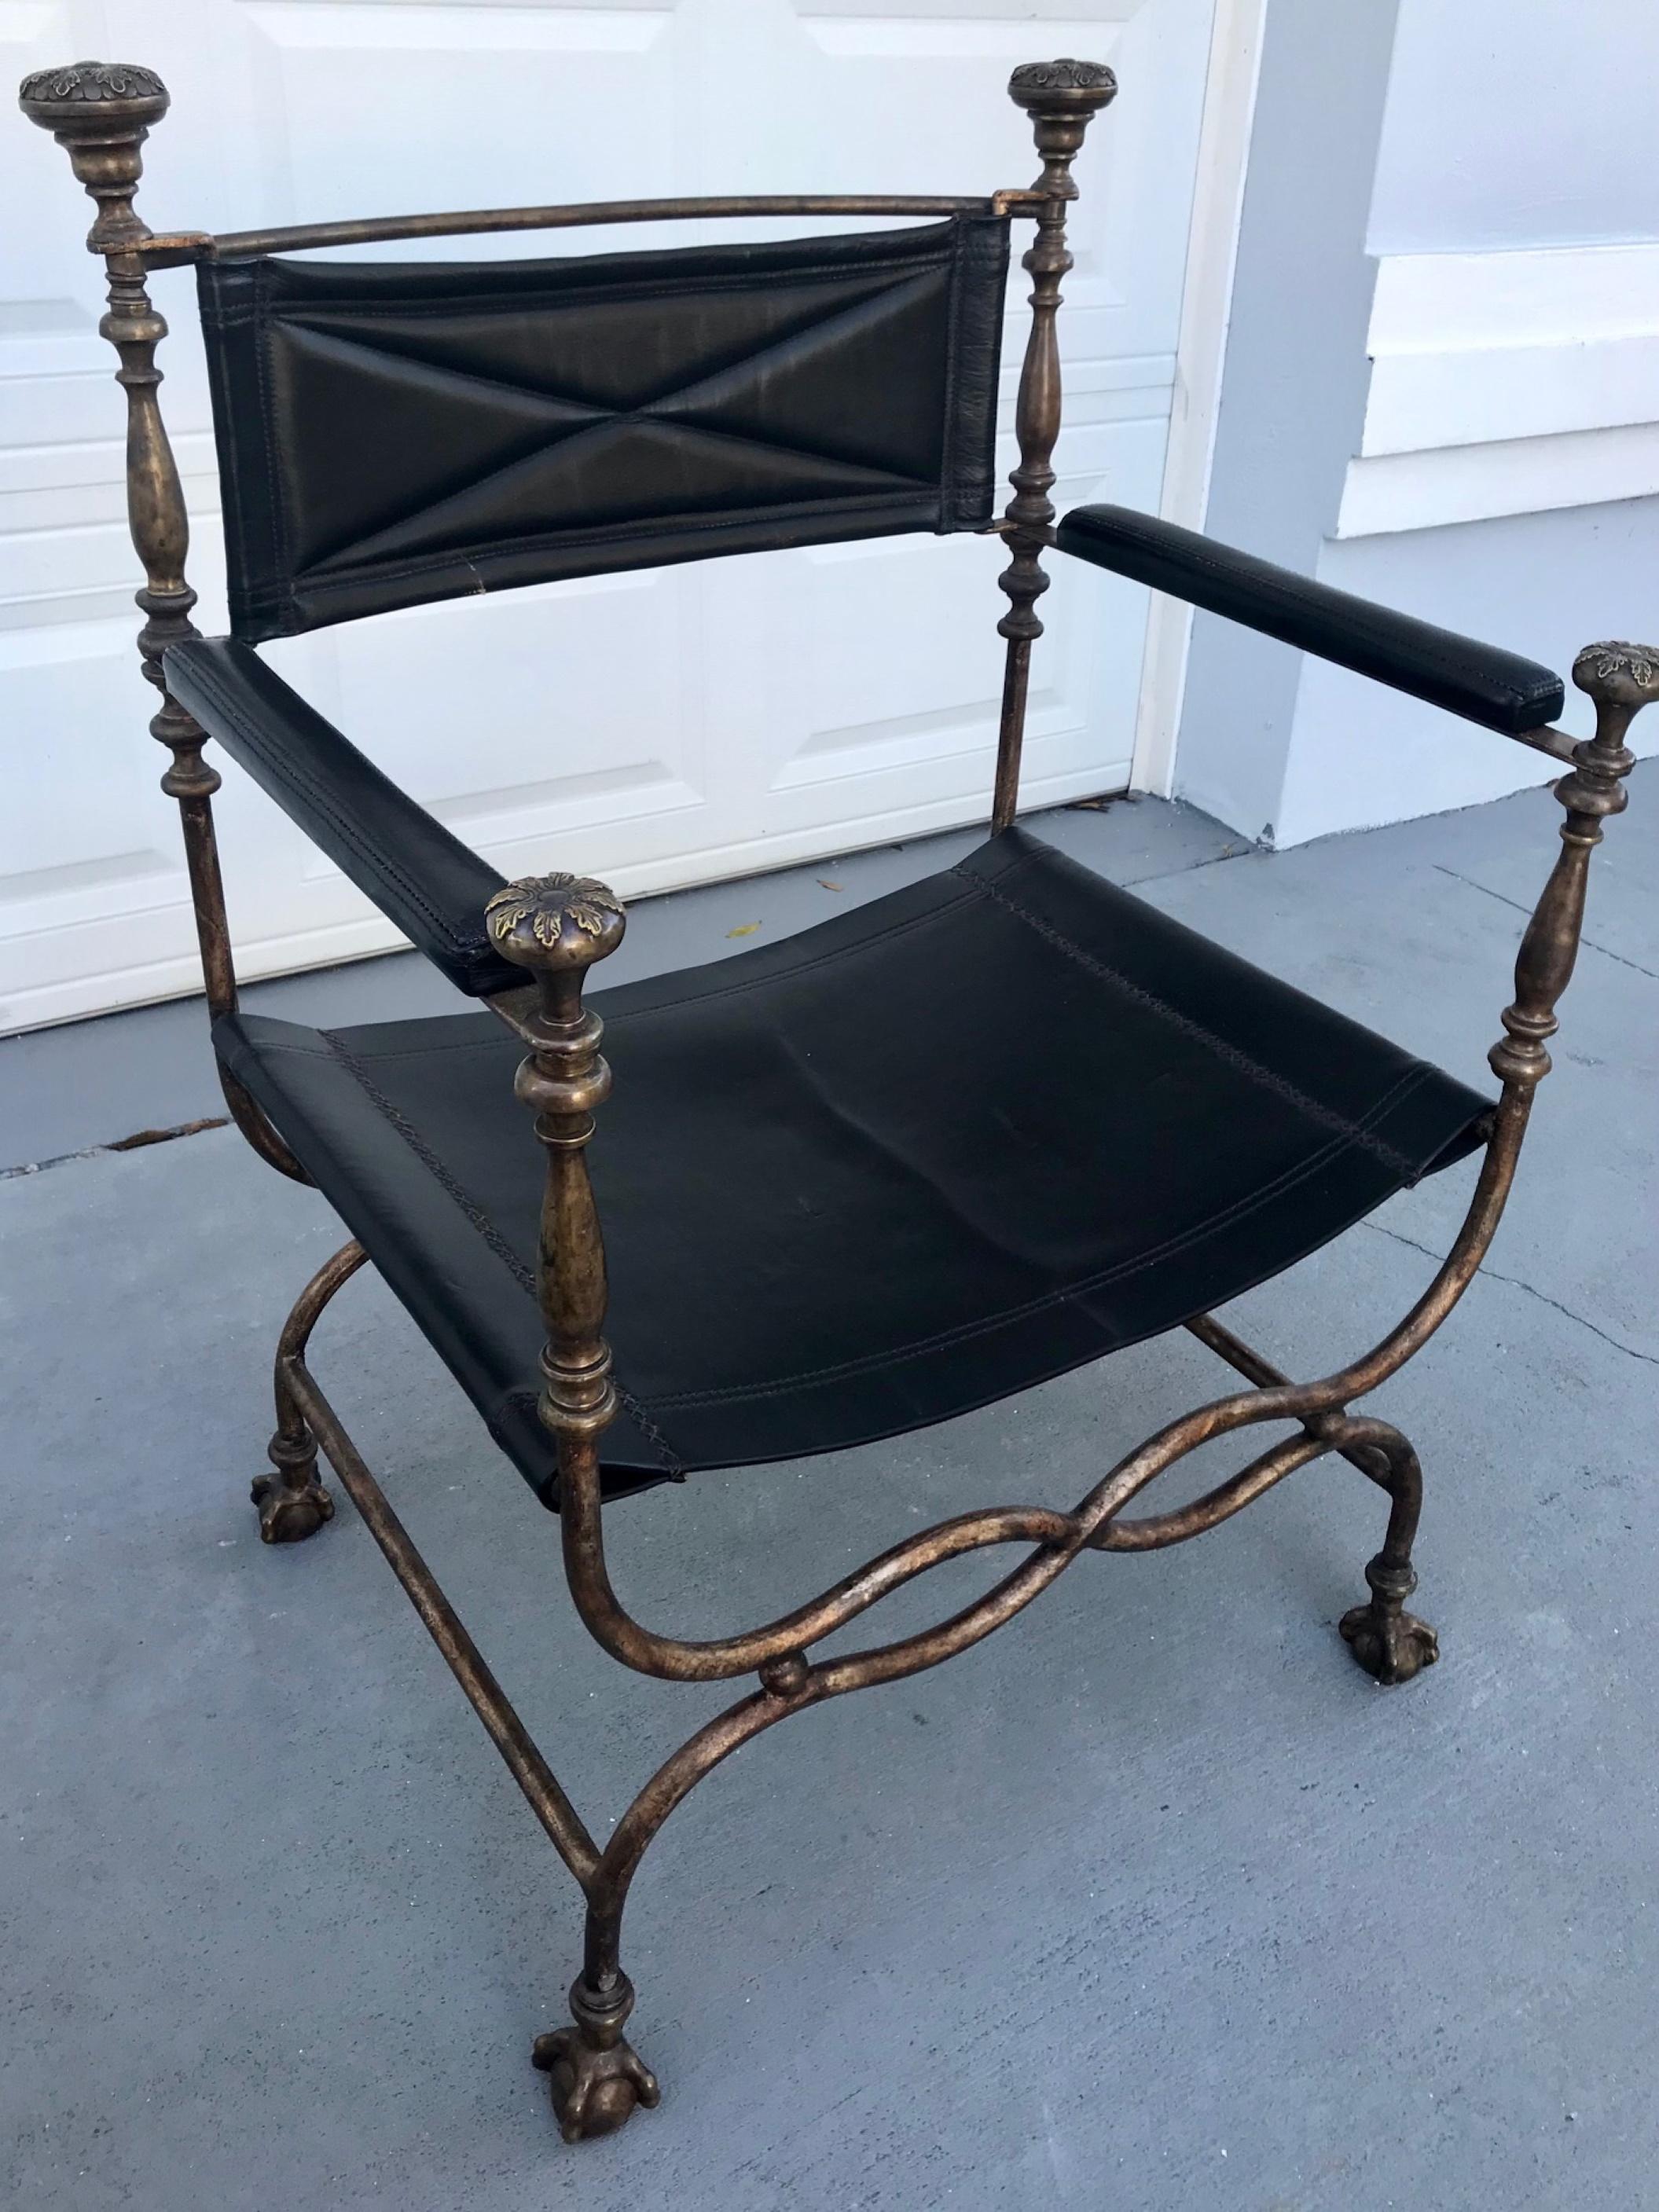 19th century Italian iron/bronze Savonarola Dante chair.

Stunning Italian, iron and bronze Savonarola Dante chair. The curving wrought iron X-frame is topped with ornate bronze finials flanking the backrest and the front on each arm. This